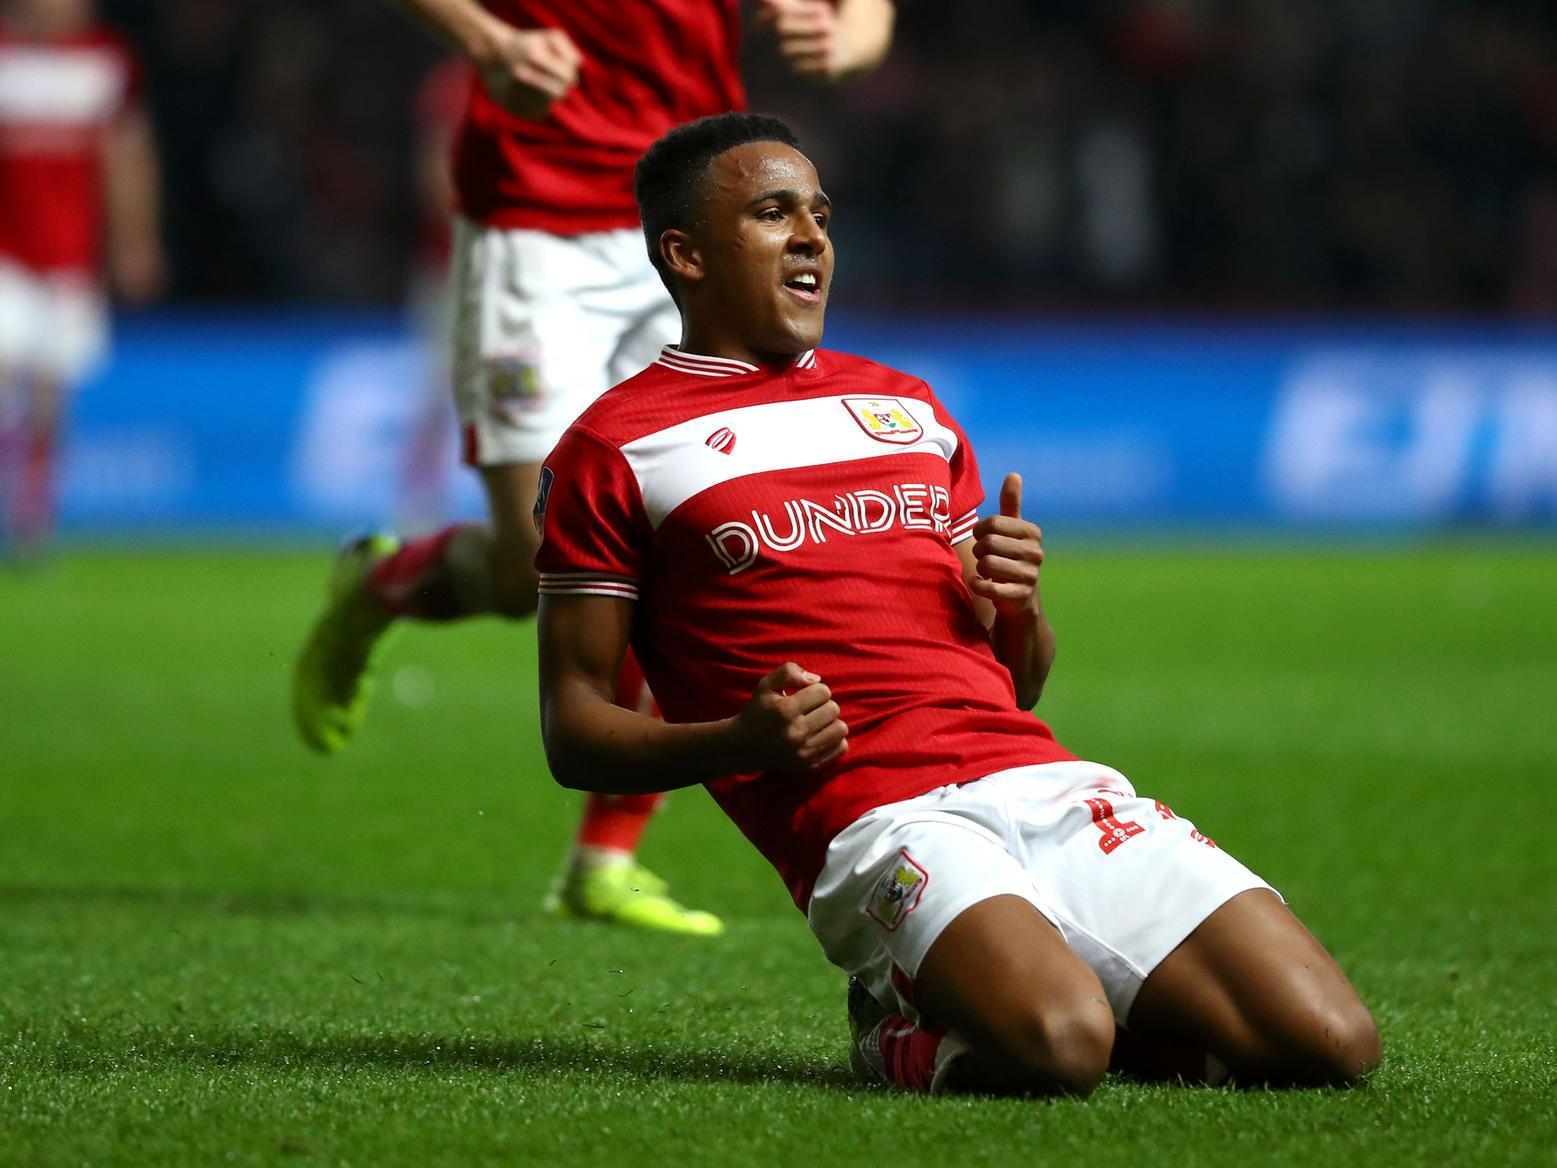 Celtic are believed to have stepped up their interest in Bristol City winger Niclas Eliasson, who has scored three goals and made an impressive ten assists so far this season. (Daily Record)